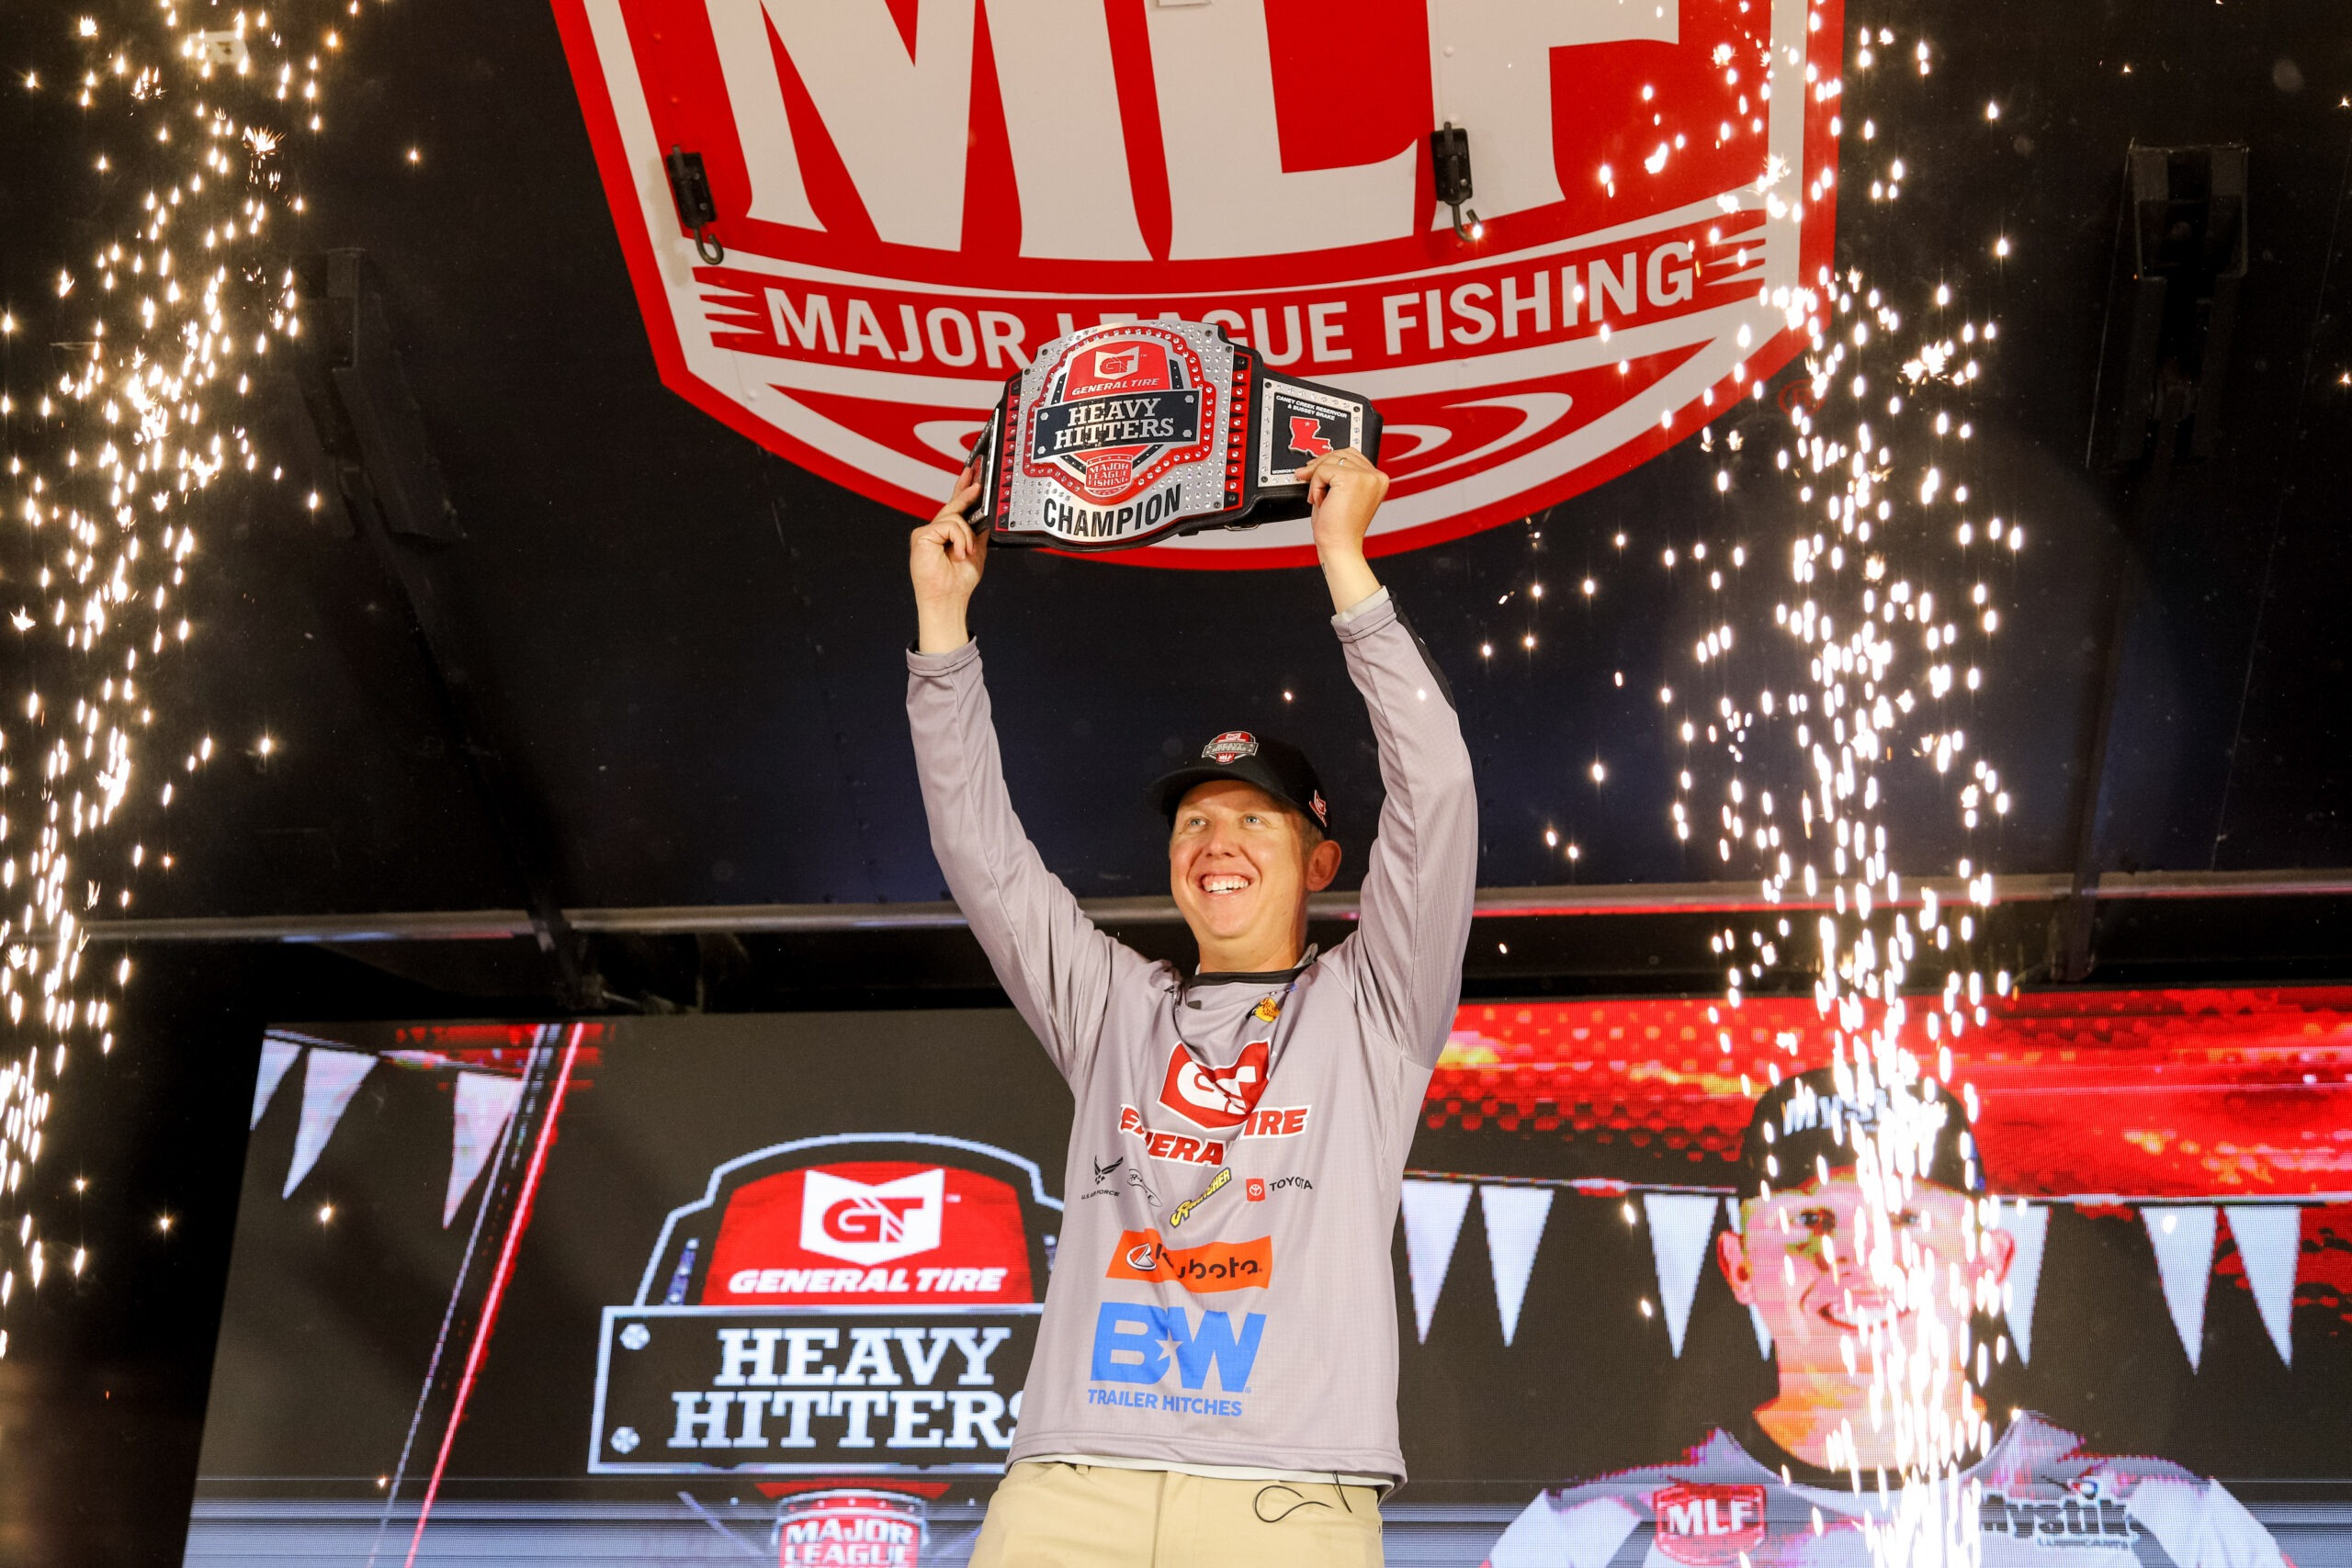 Alabama's Ryan Salzman Earns First MLF Bass Pro Tour Win at General Tire  Stage Five on Watts Bar Lake Presented by Covercraft